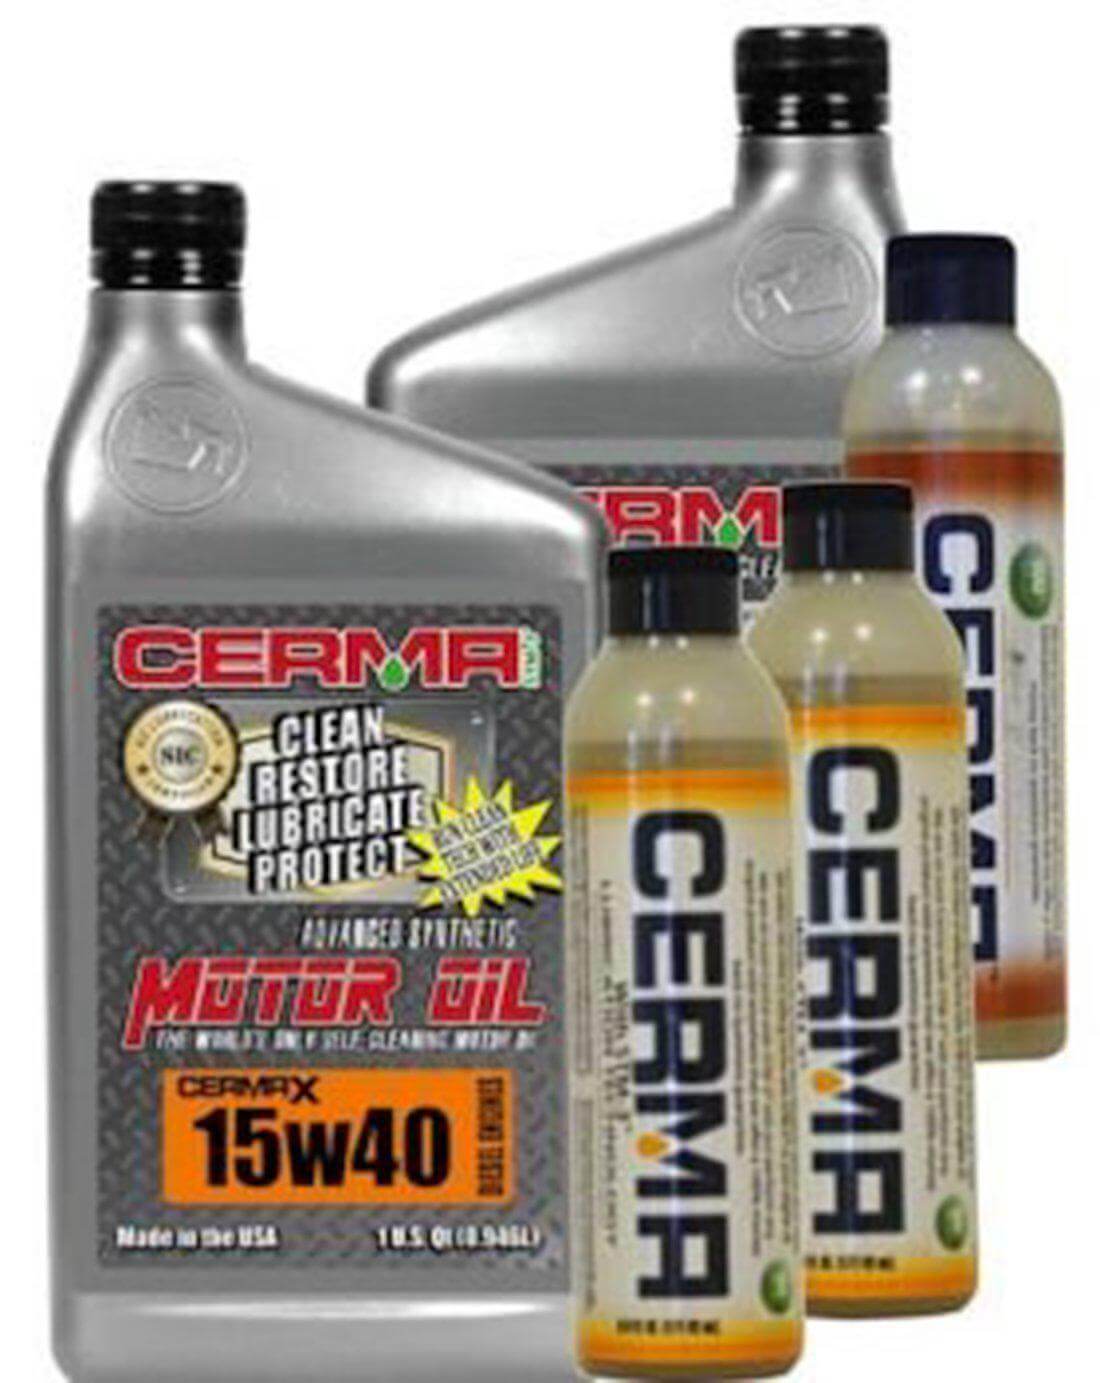 Cermax Diesel Ceramic Synthetic Oil Value Package for Semi Truck Engines at $942.91 only from cermatreatment.com